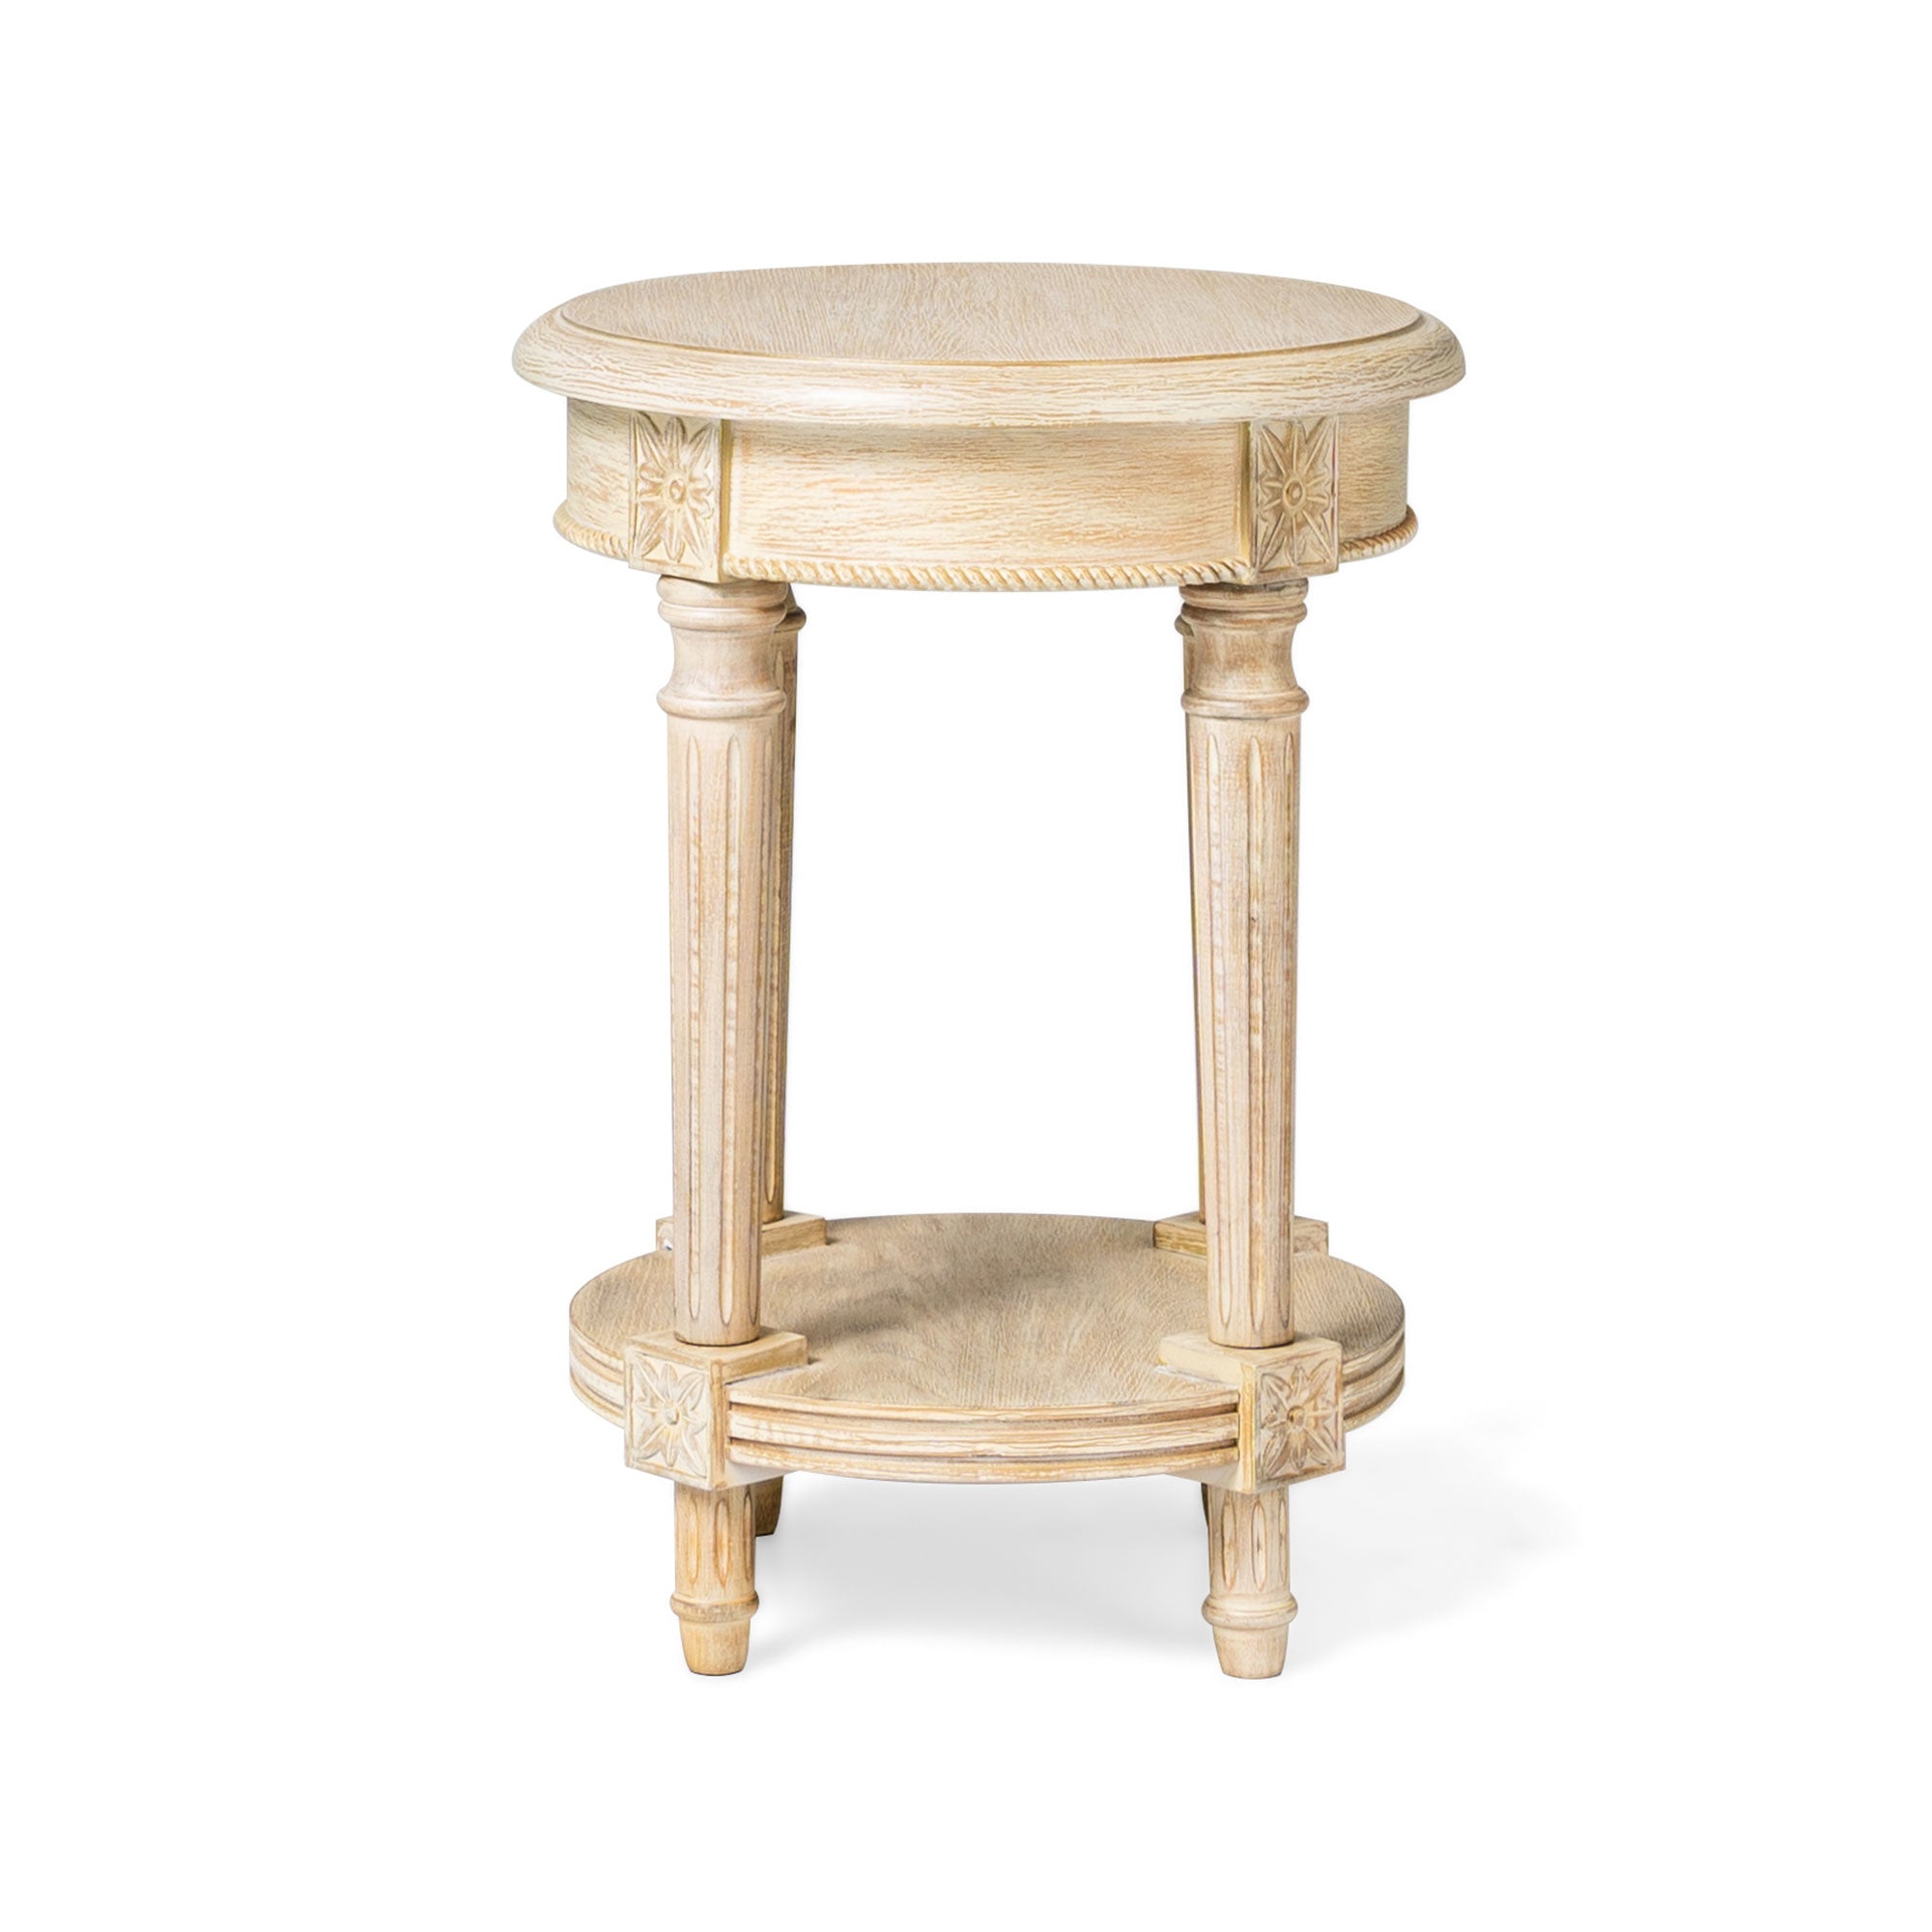 Pullman Traditional Round Wooden Side Table in Antiqued White Finish in Accent Tables by Maven Lane